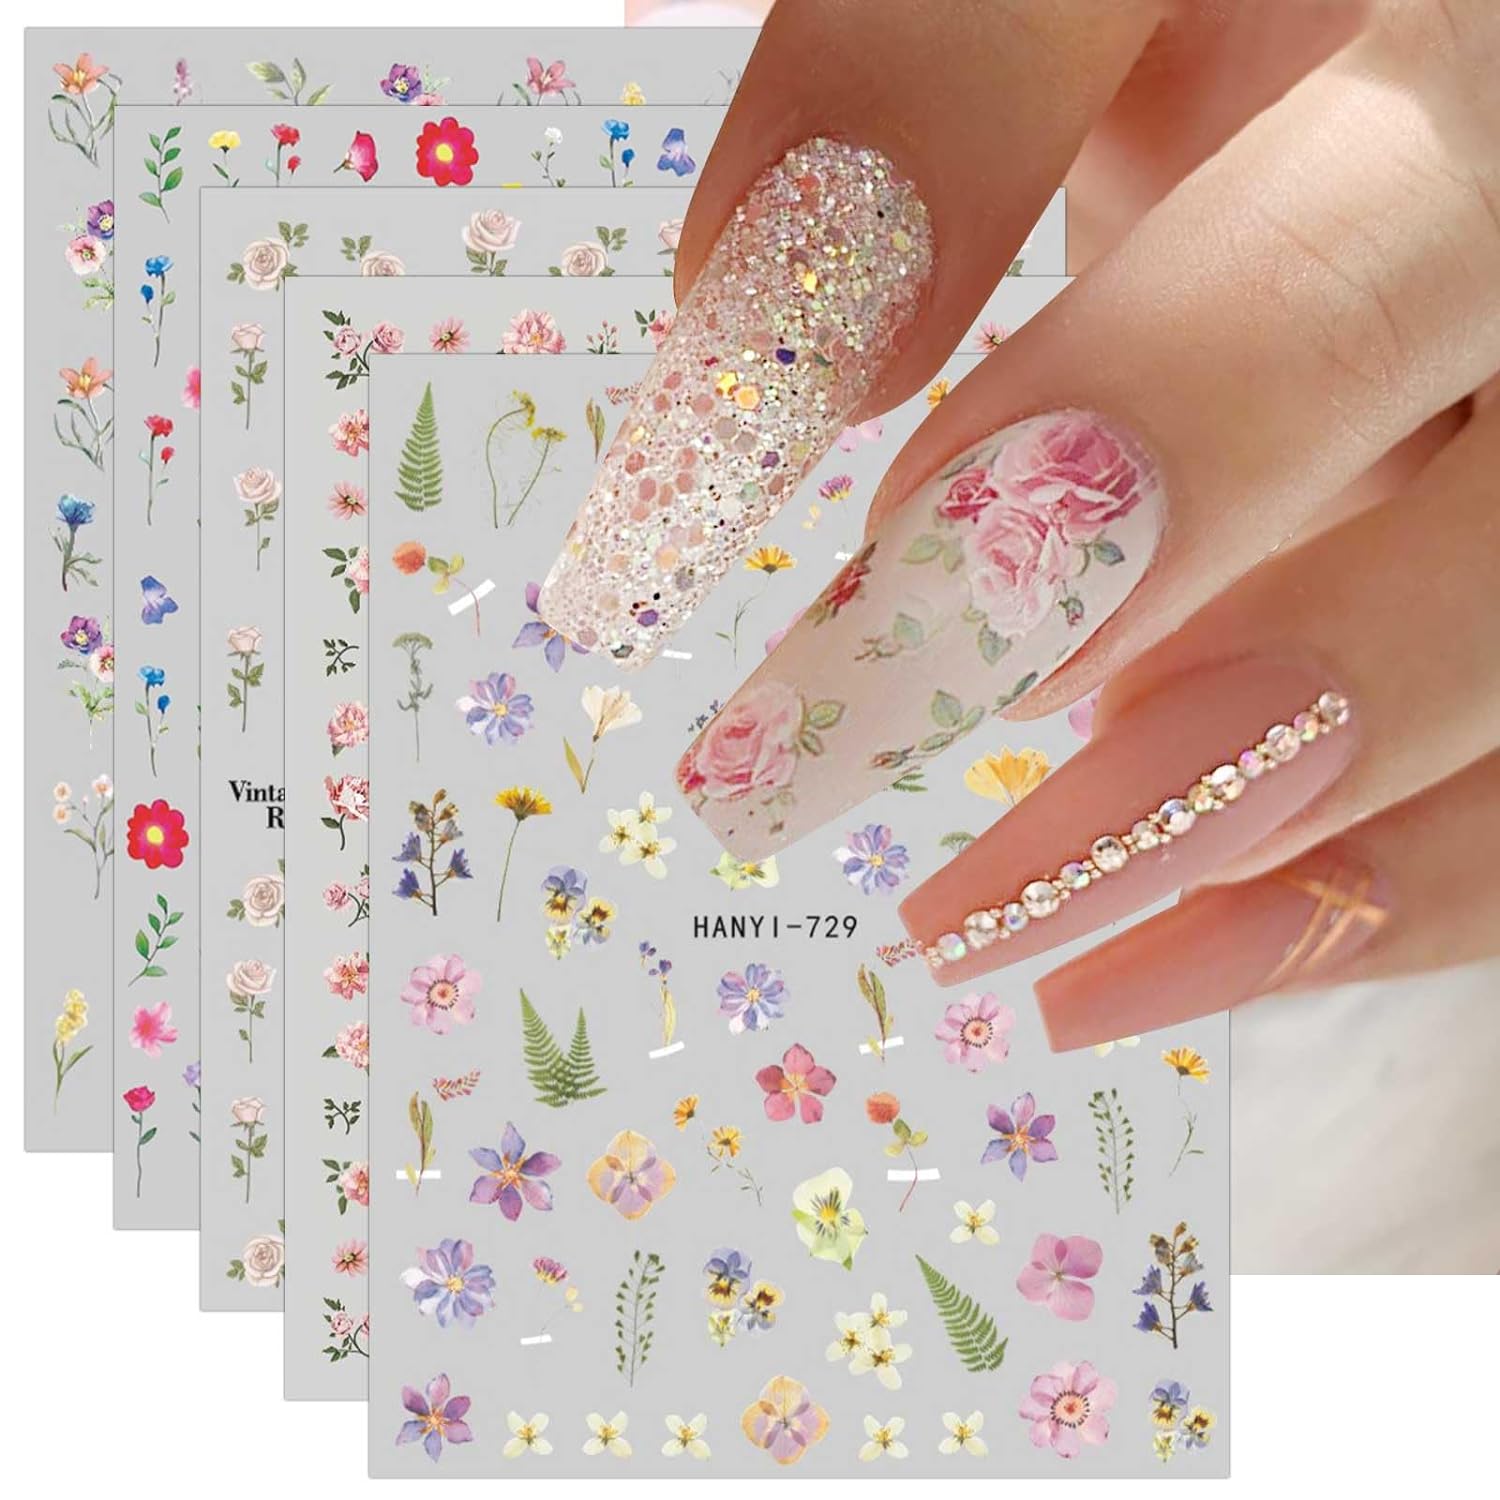 9 Sheets Spring Flower Nail Art Stickers Decals Self-Adhesive Pegatinas Uñas Colorful Summer Floral Nail Supplies Nail Art Design Decoration Accessories - HealthFulBeautyLife